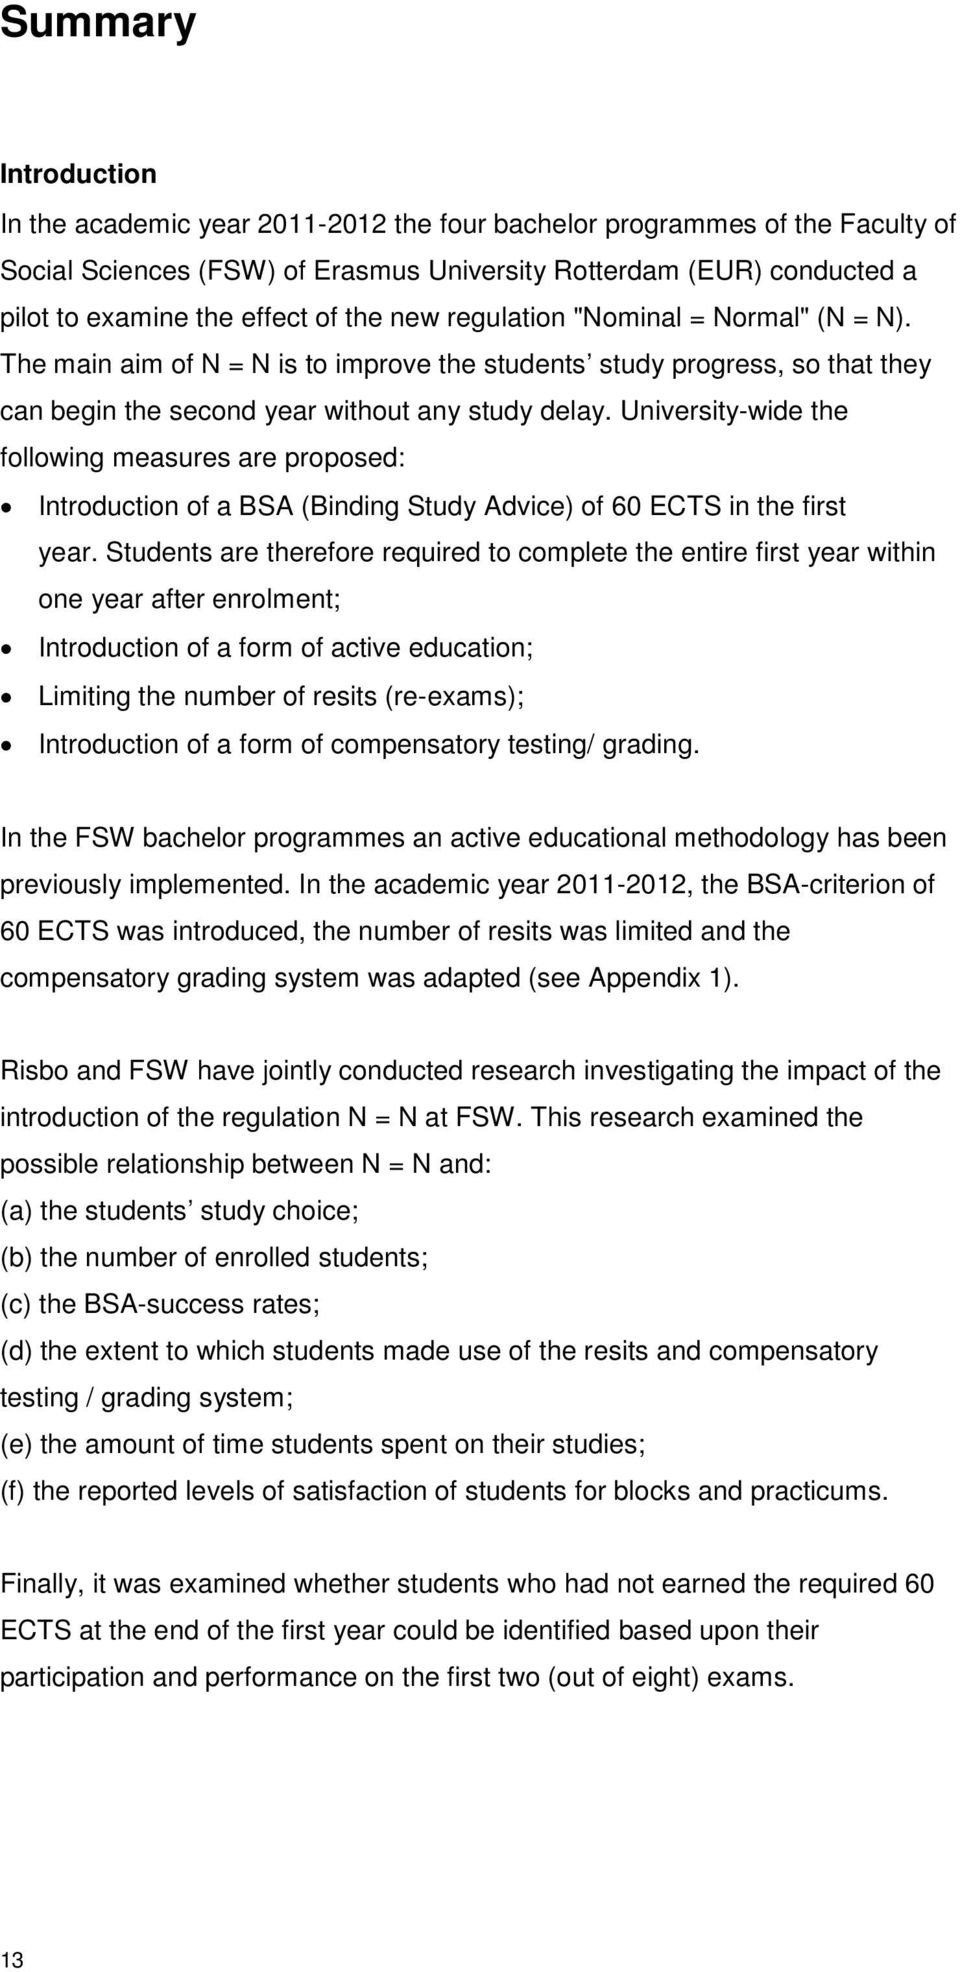 University-wide the following measures are proposed: Introduction of a BSA (Binding Study Advice) of 60 ECTS in the first year.